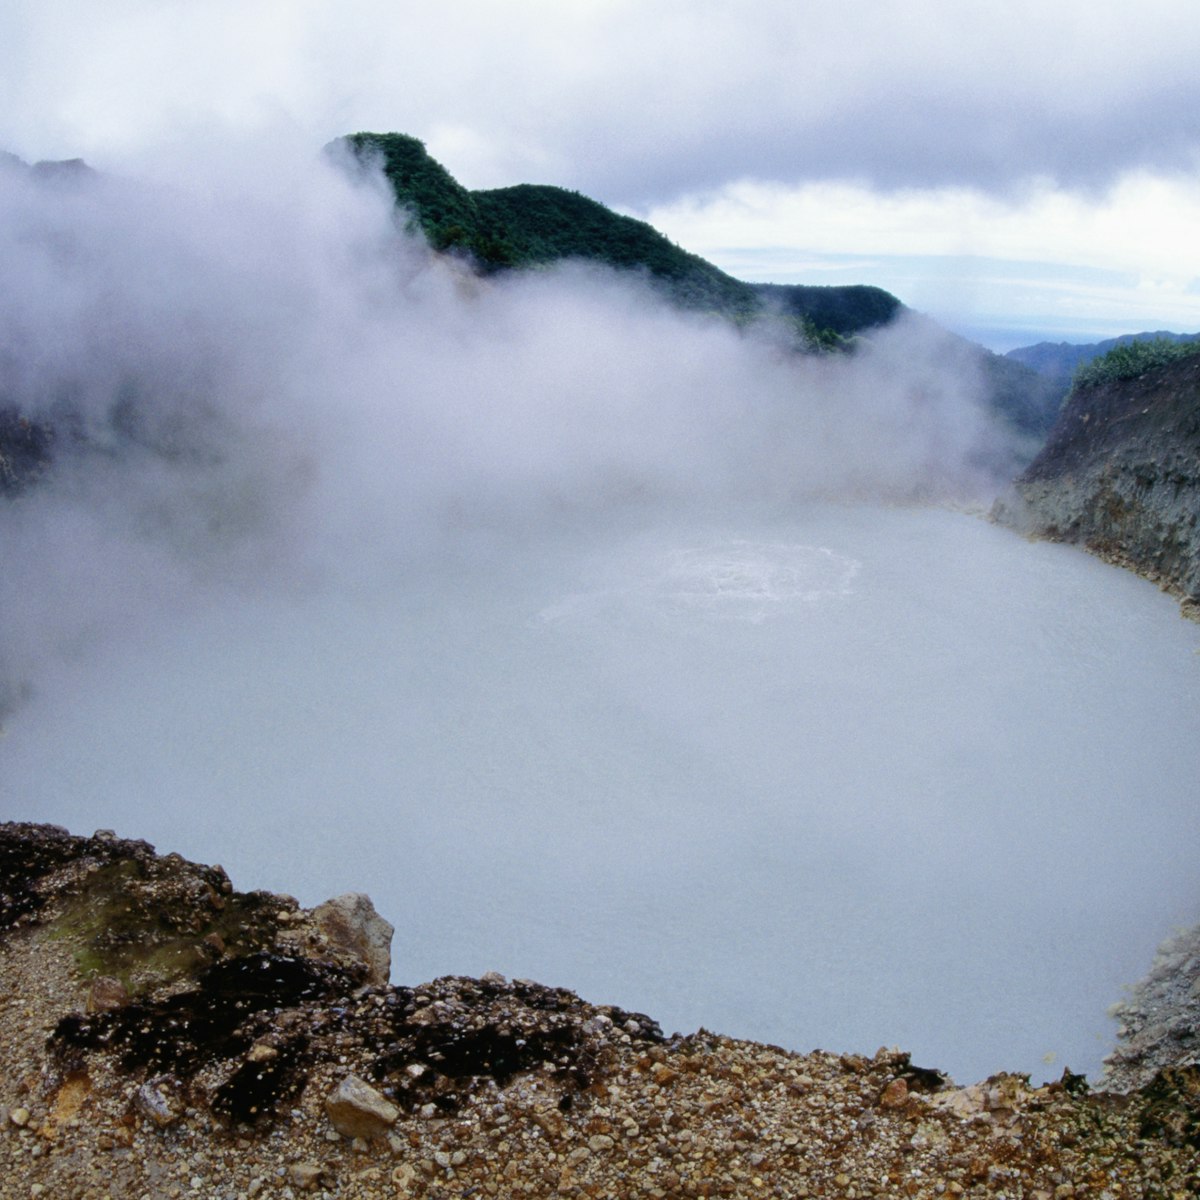 Boiling Lake in the Valley of Desolation is the second largest solfatara, a volcanic vent emitting only sulphurous gases, water vapour or mud.